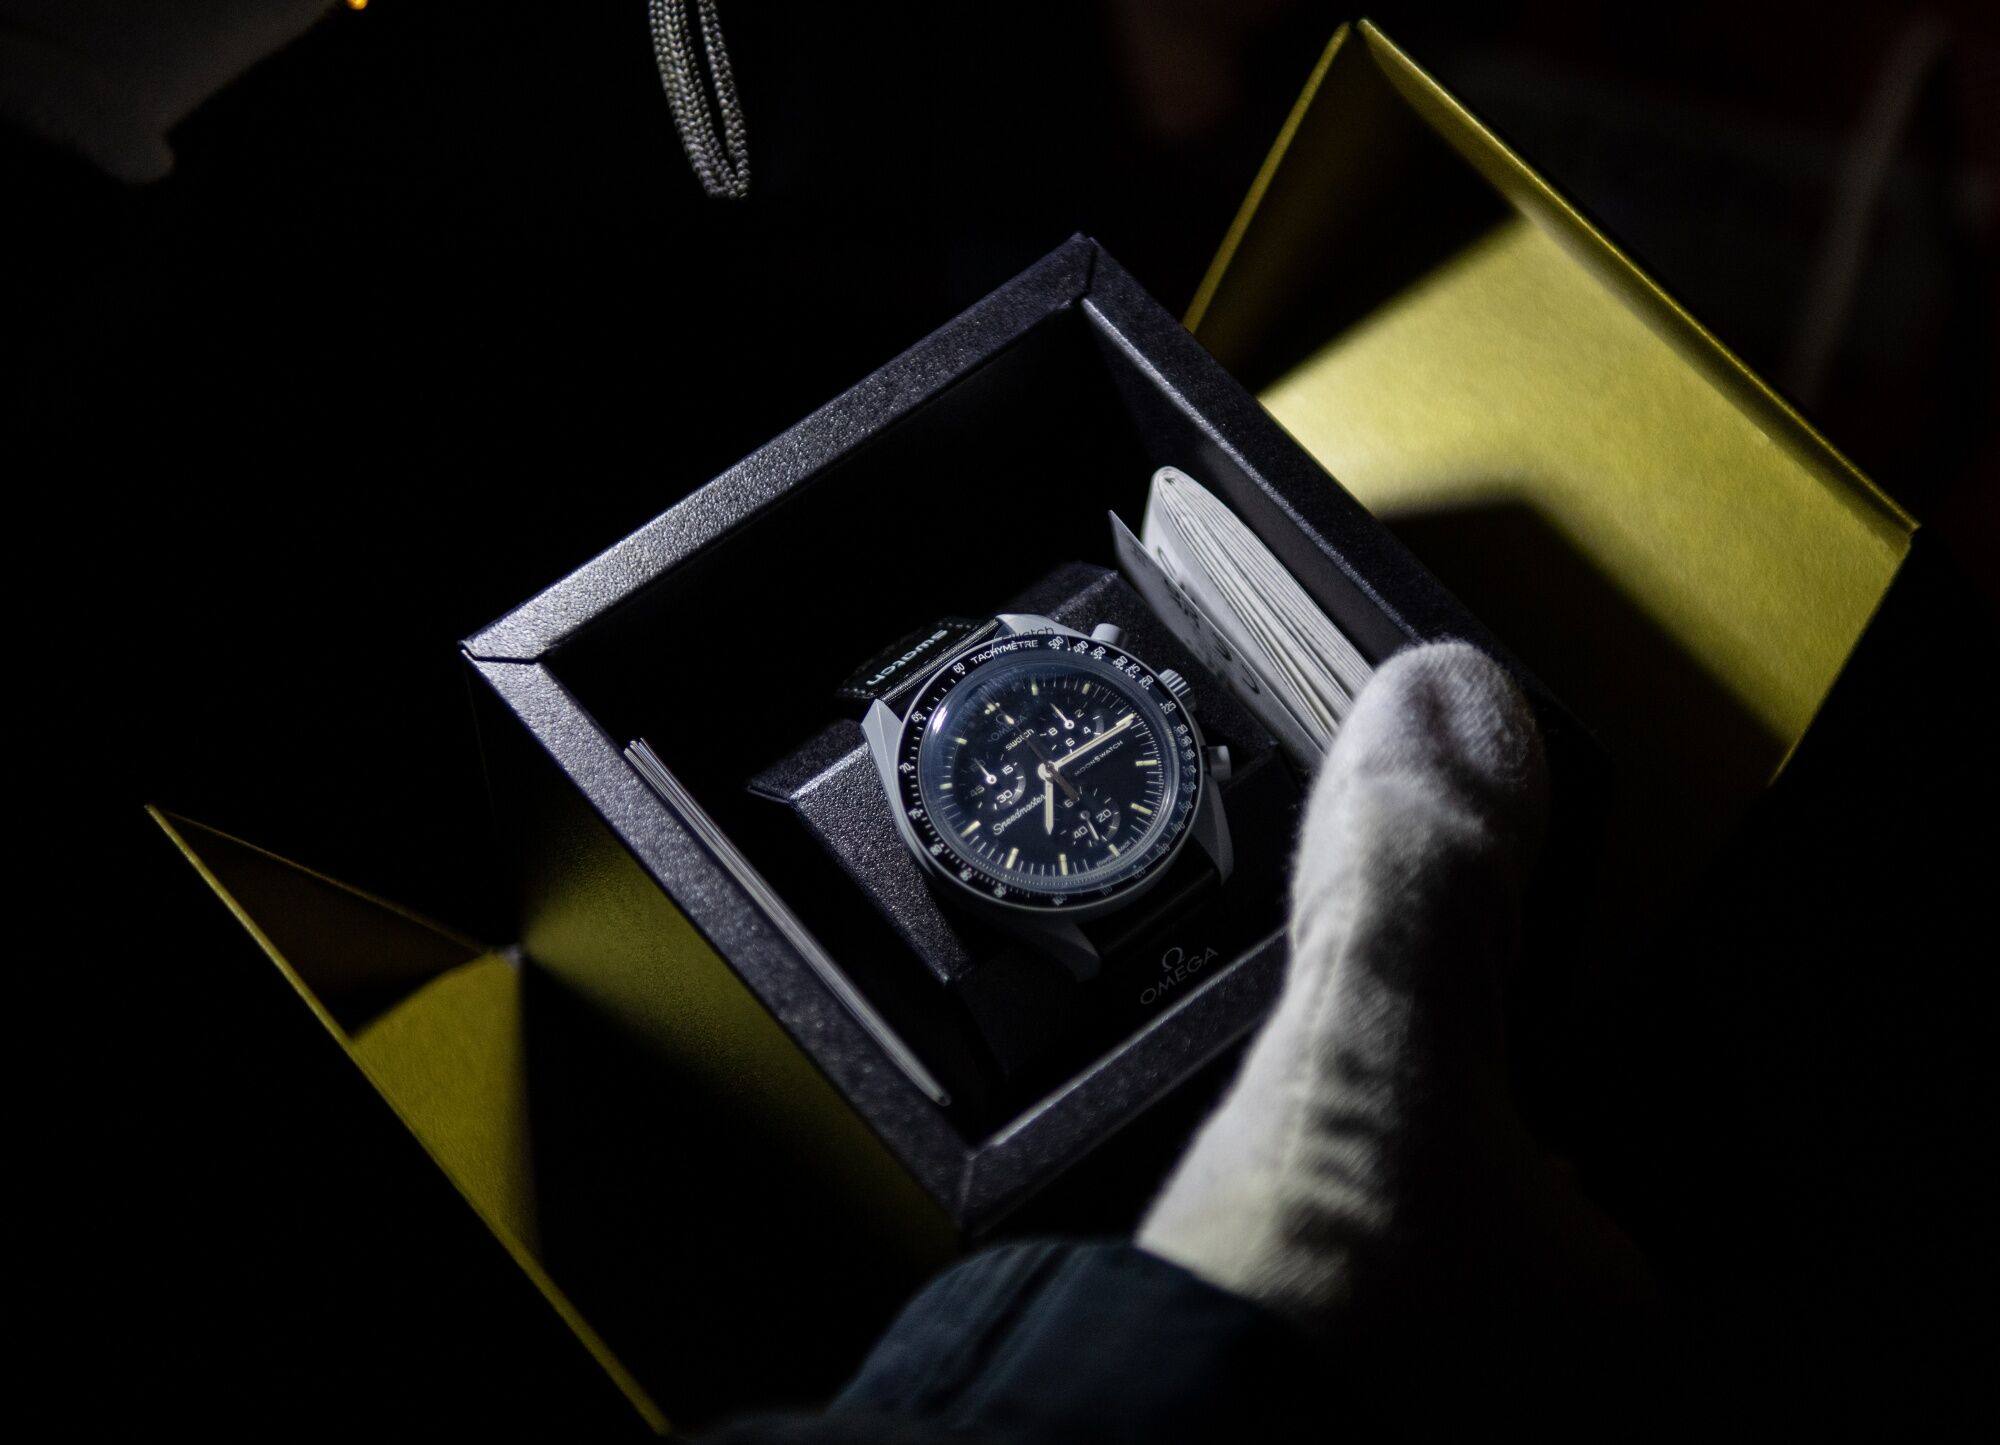 omega raises us$600,000 for eye charity orbis through auction of hong kong special edition watches